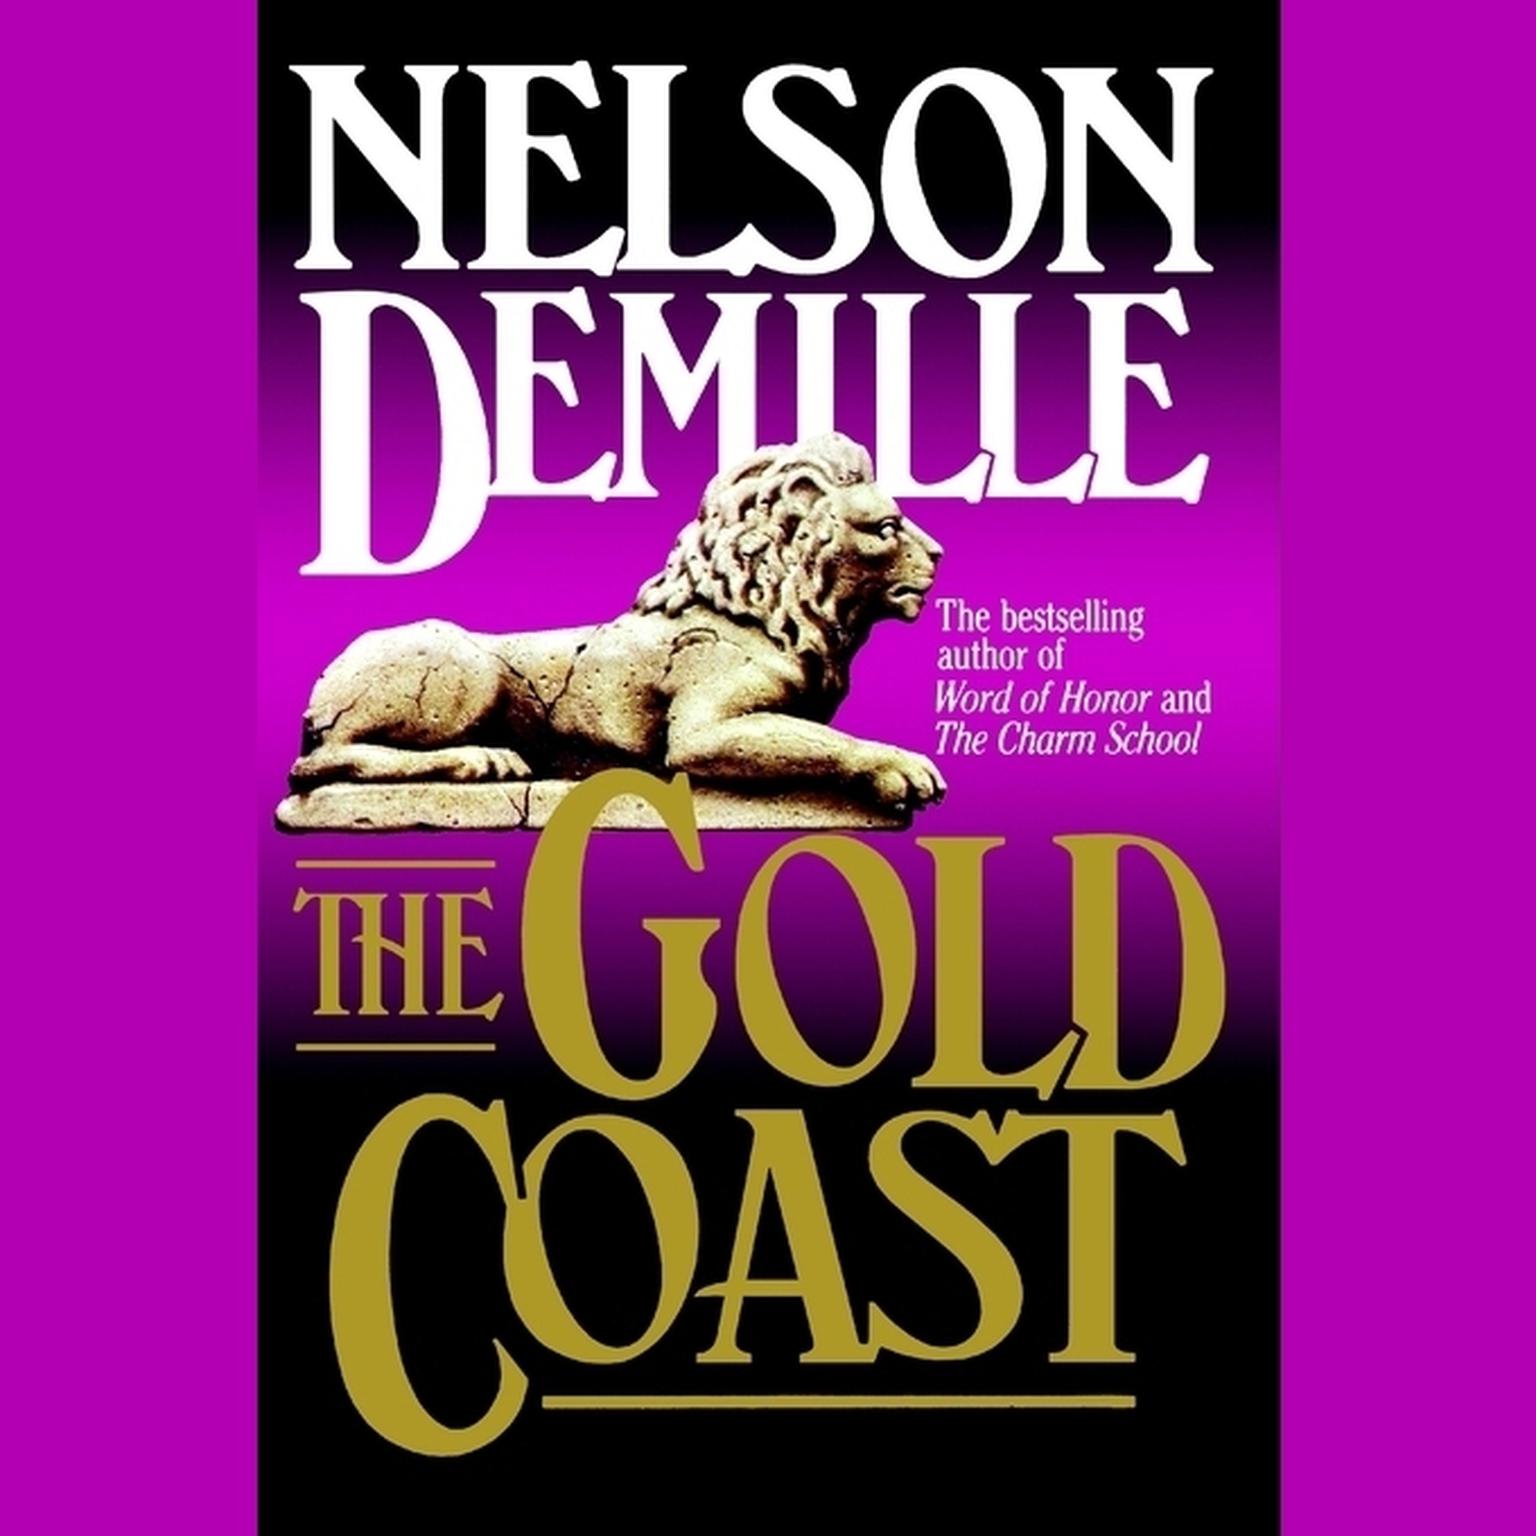 The Gold Coast Audiobook, by Nelson DeMille